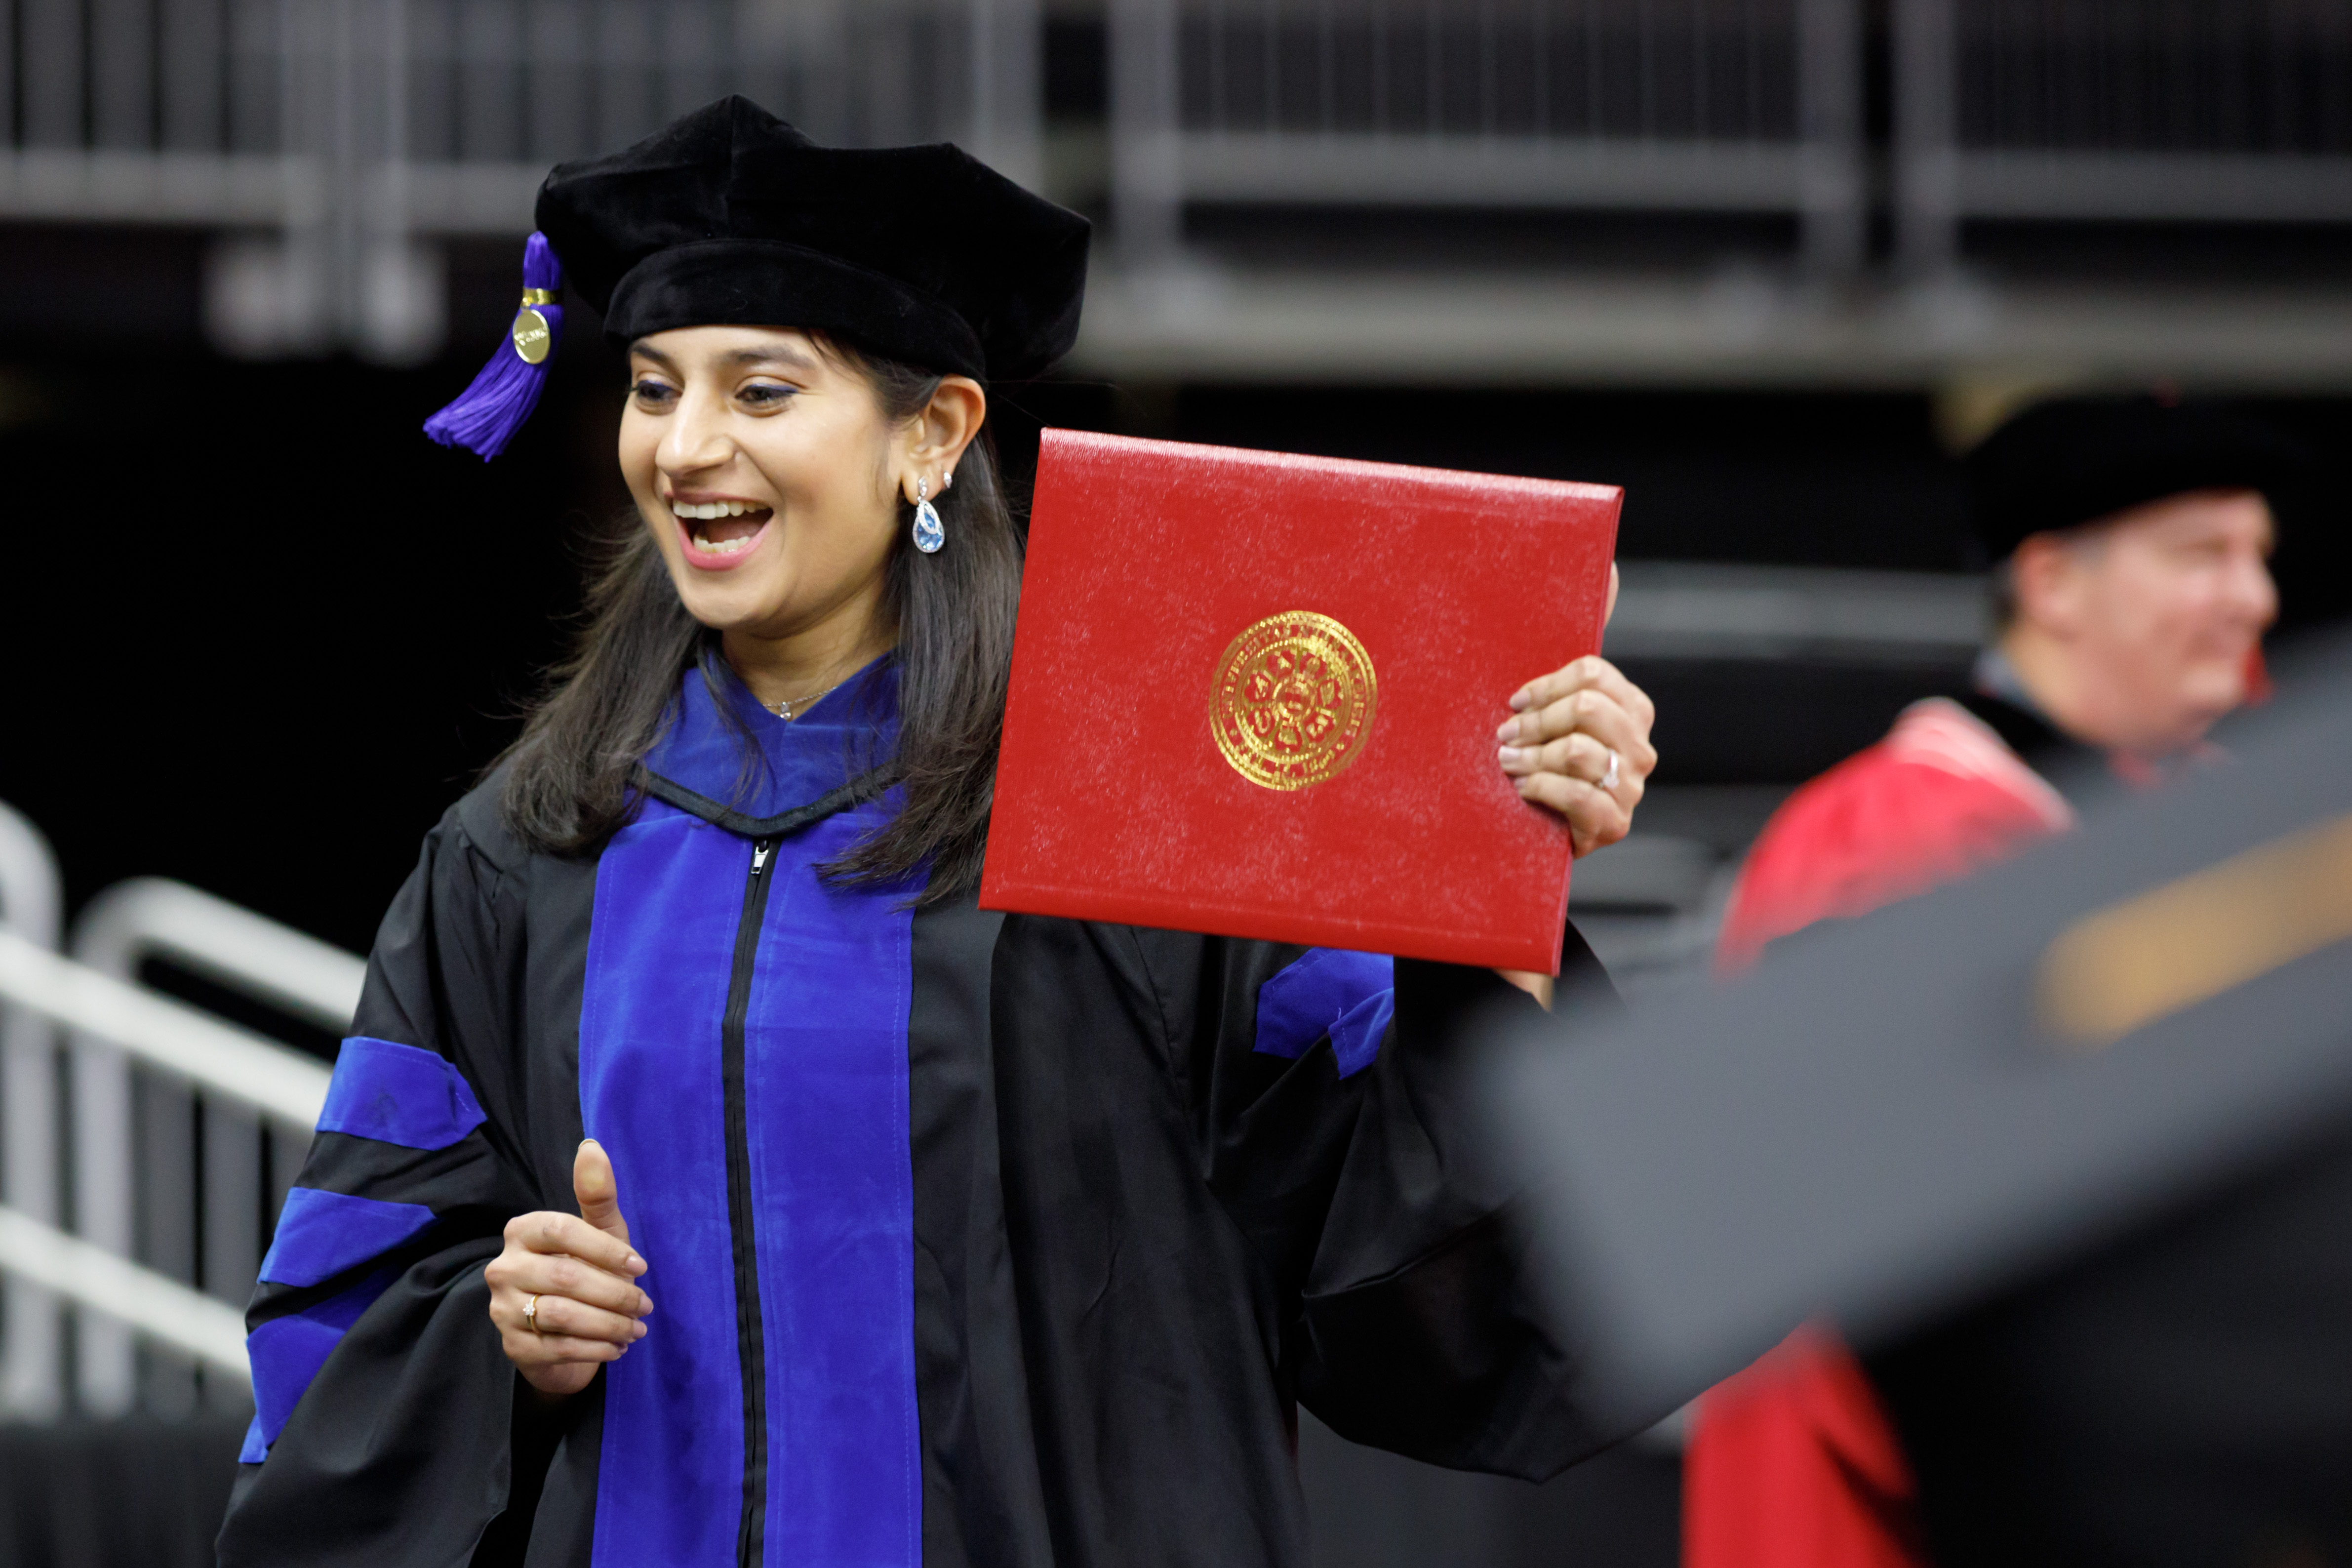 woman in cap and gown holding a diploma